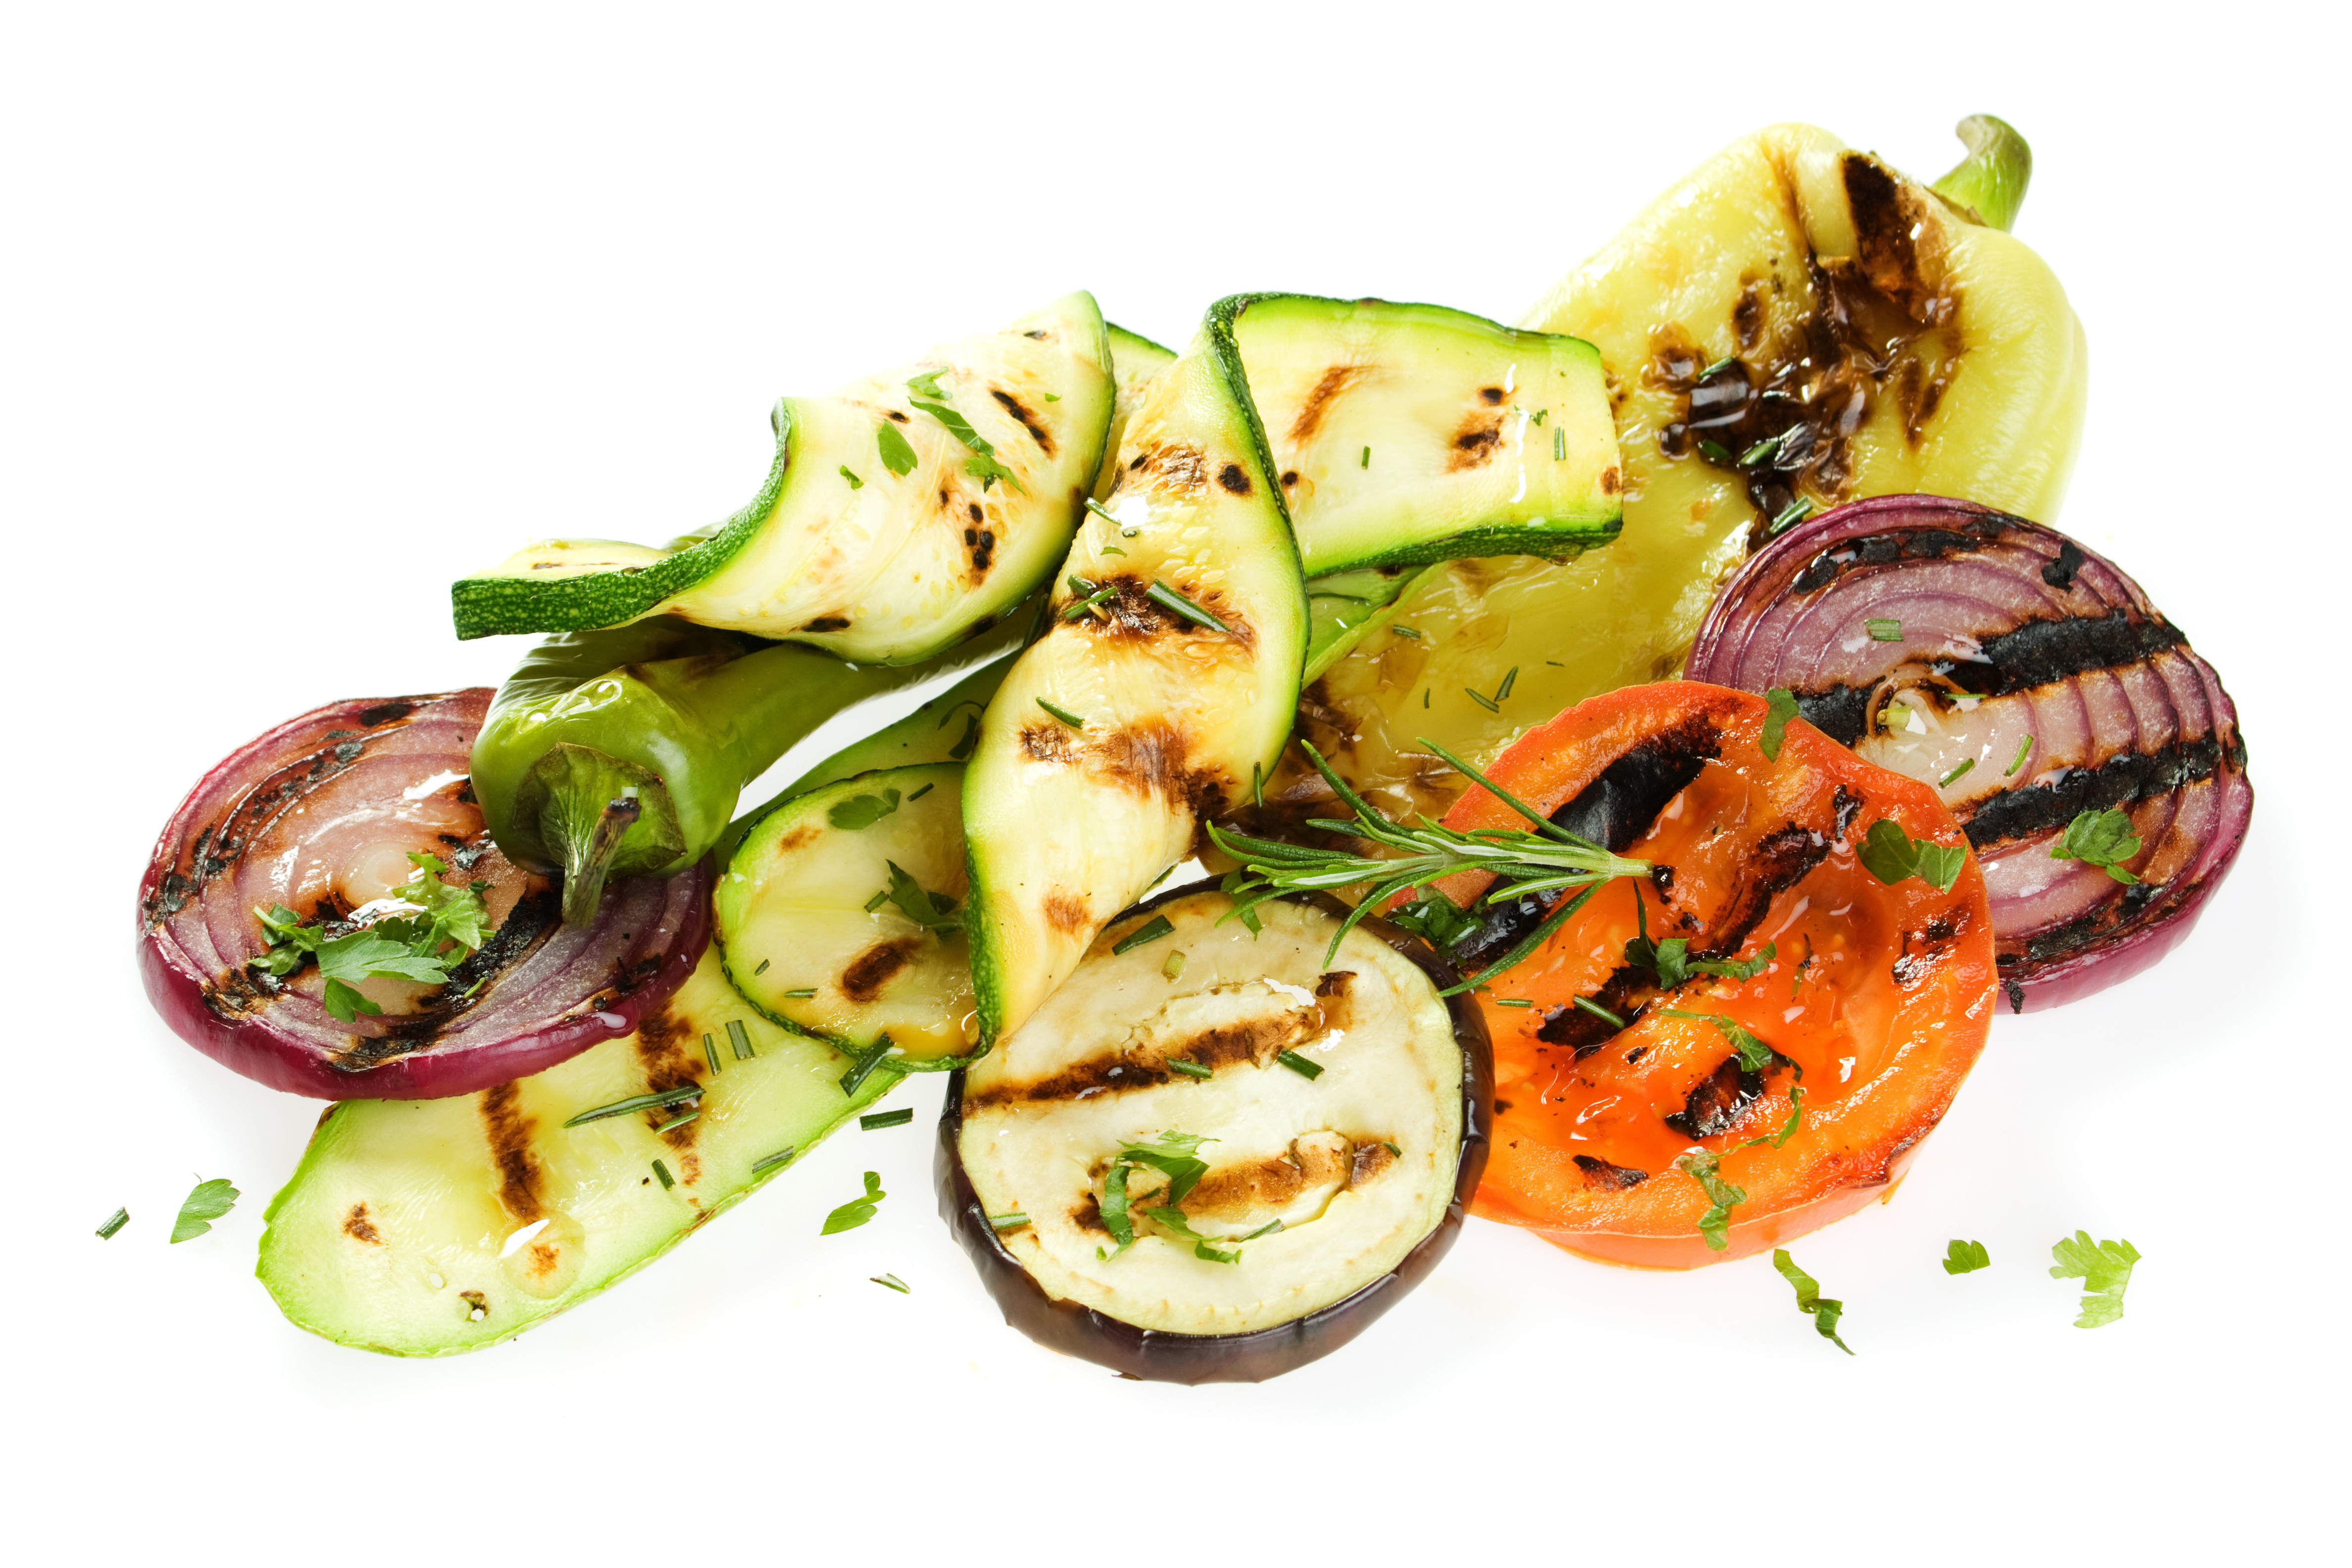 A pile of sliced vegetables such as zucchini, onions, eggplant, and tomato, all with grill marks.